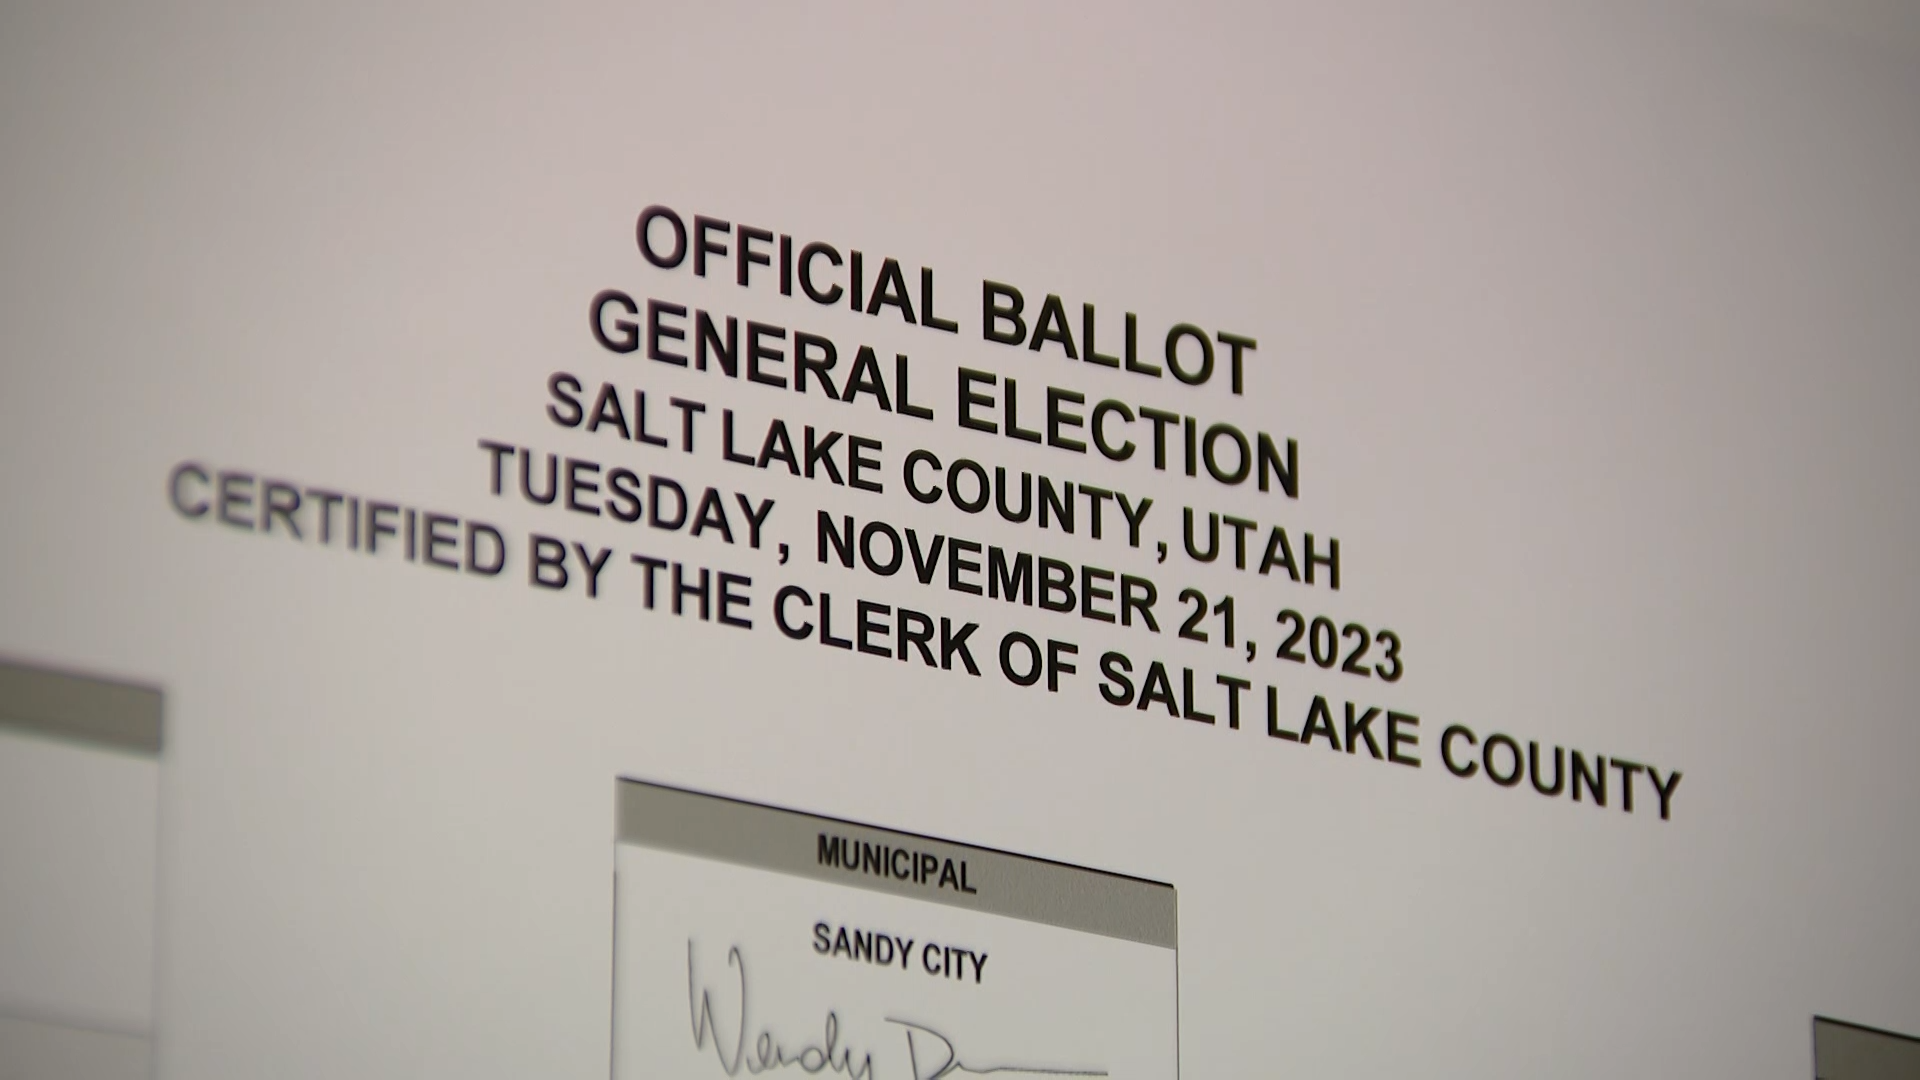 A Salt Lake County General Election ballot with the special election date of Nov. 21, 2023. (KSL TV...